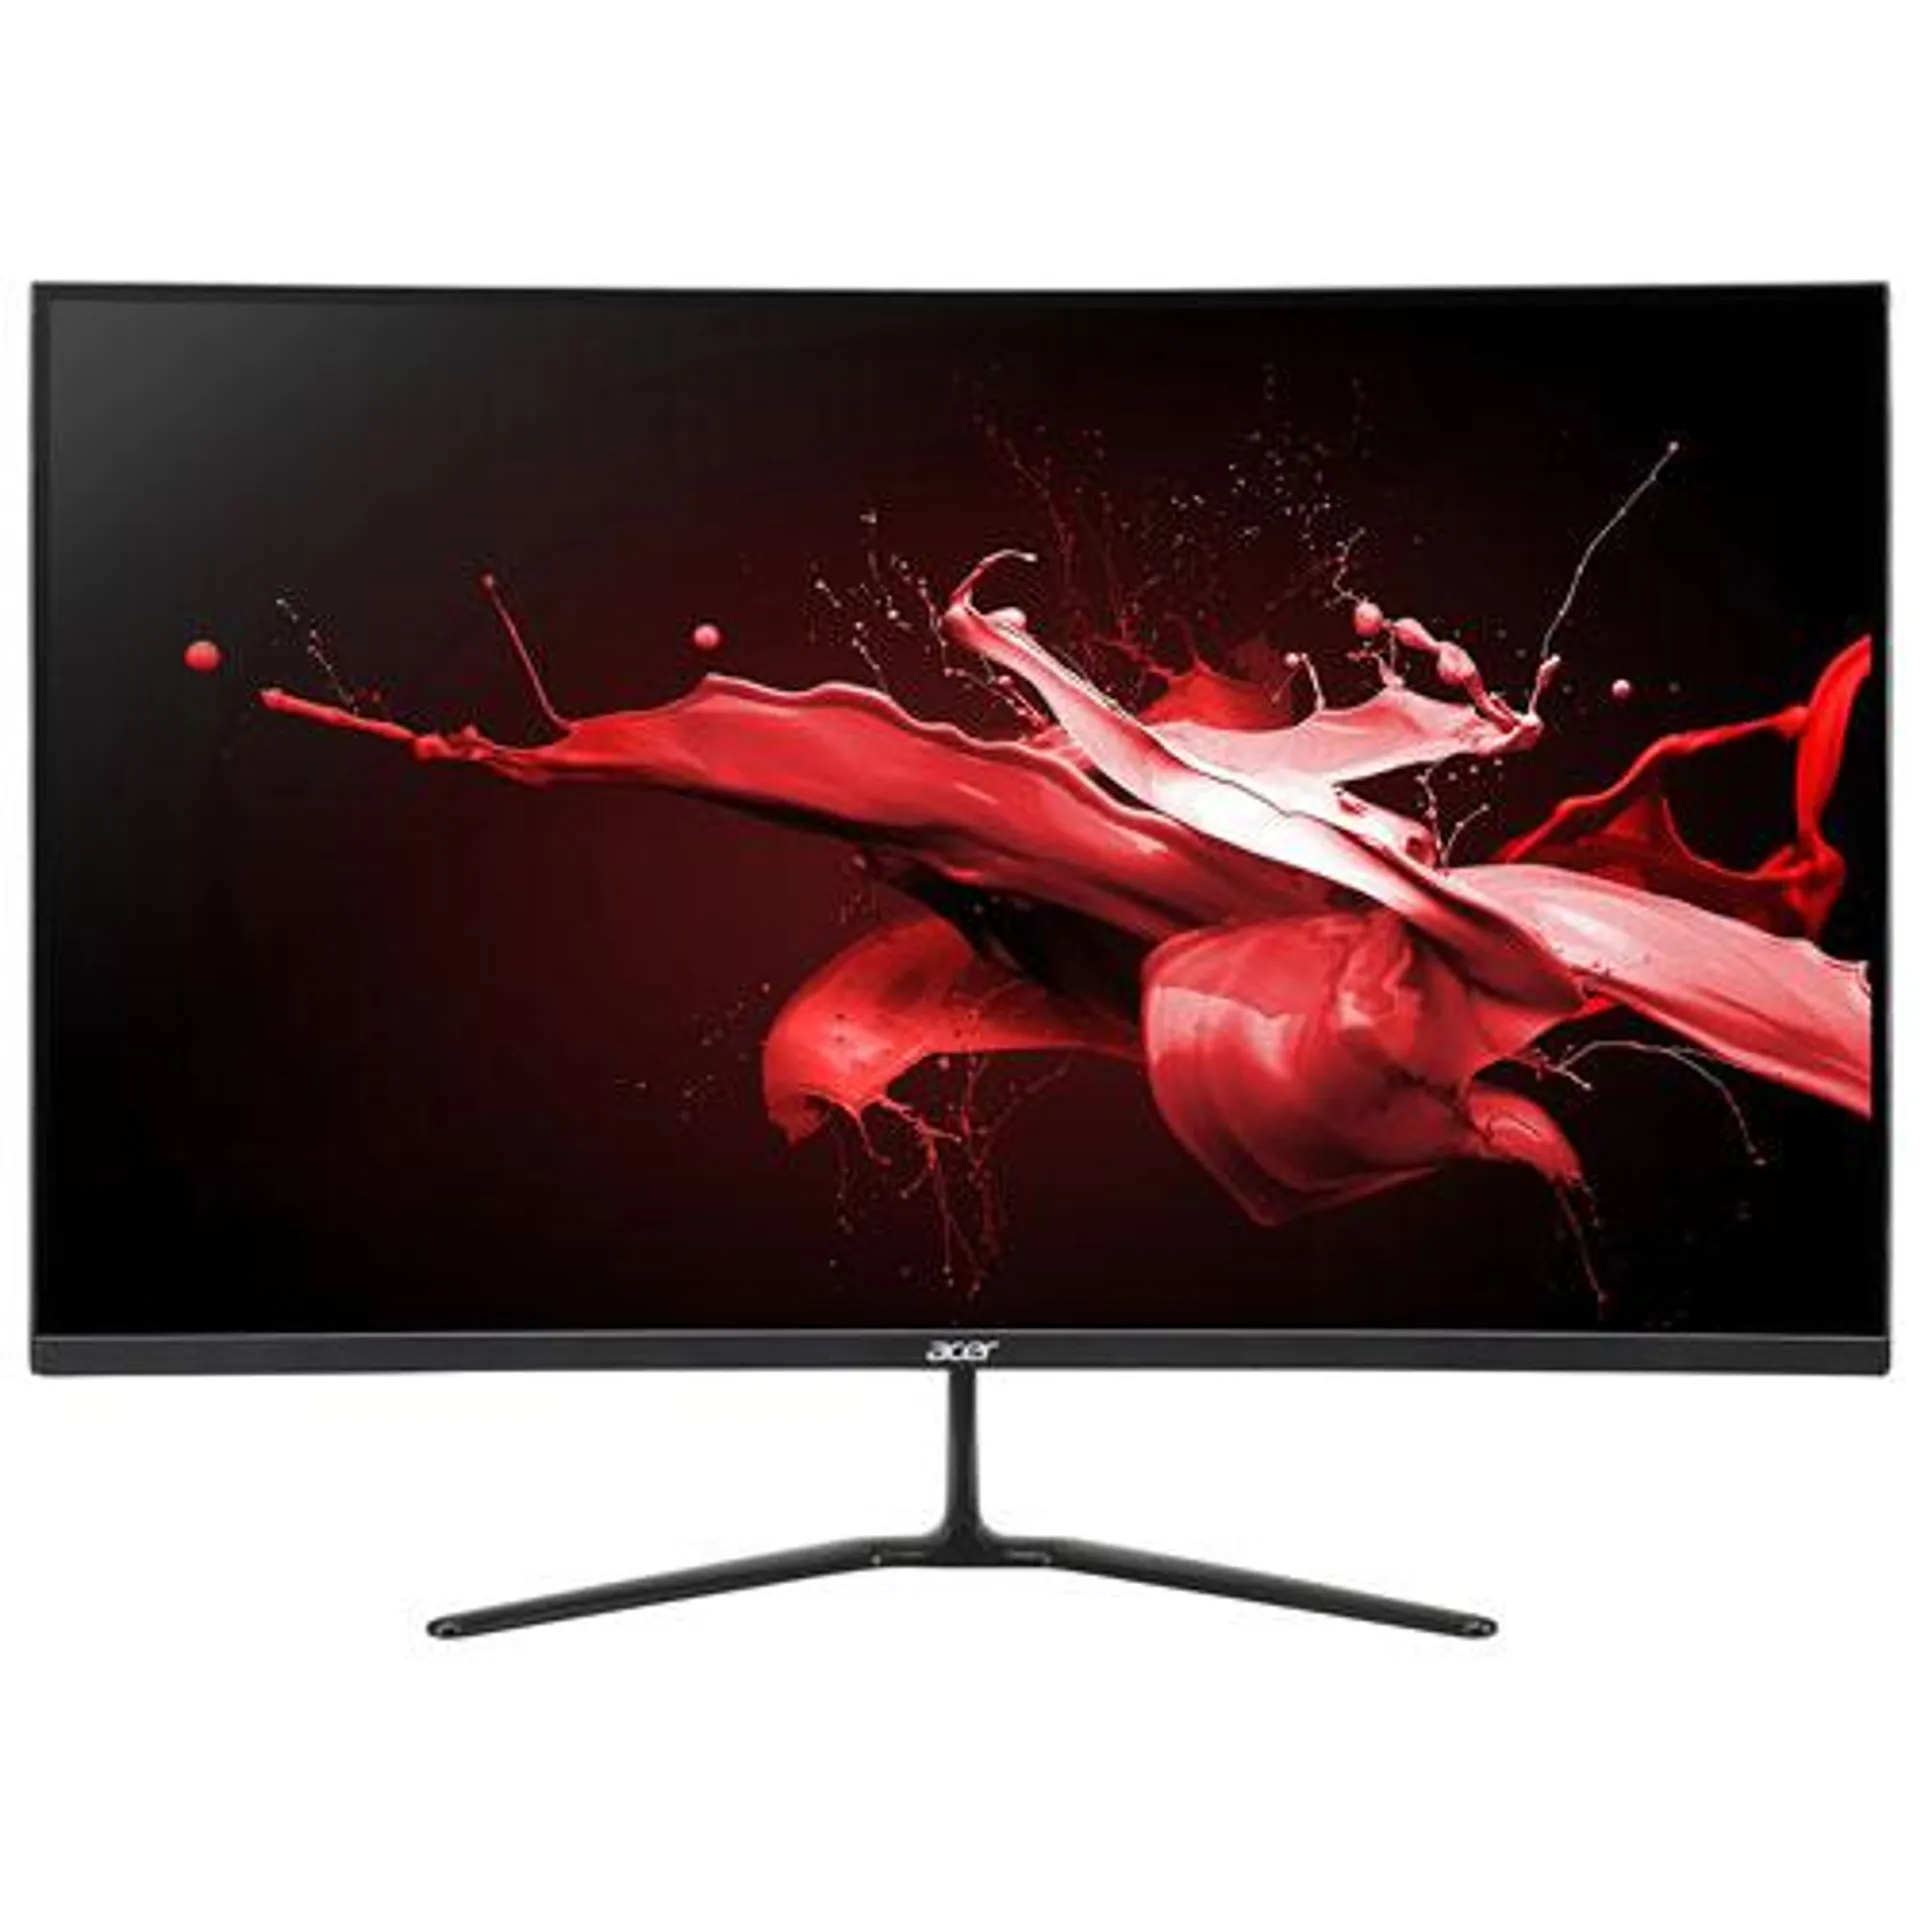 Acer 31.5" FHD 165Hz 1ms GTG Curved VA LED FreeSync Gaming Monitor (ED320QR Sbiipx) - Only at Best Buy